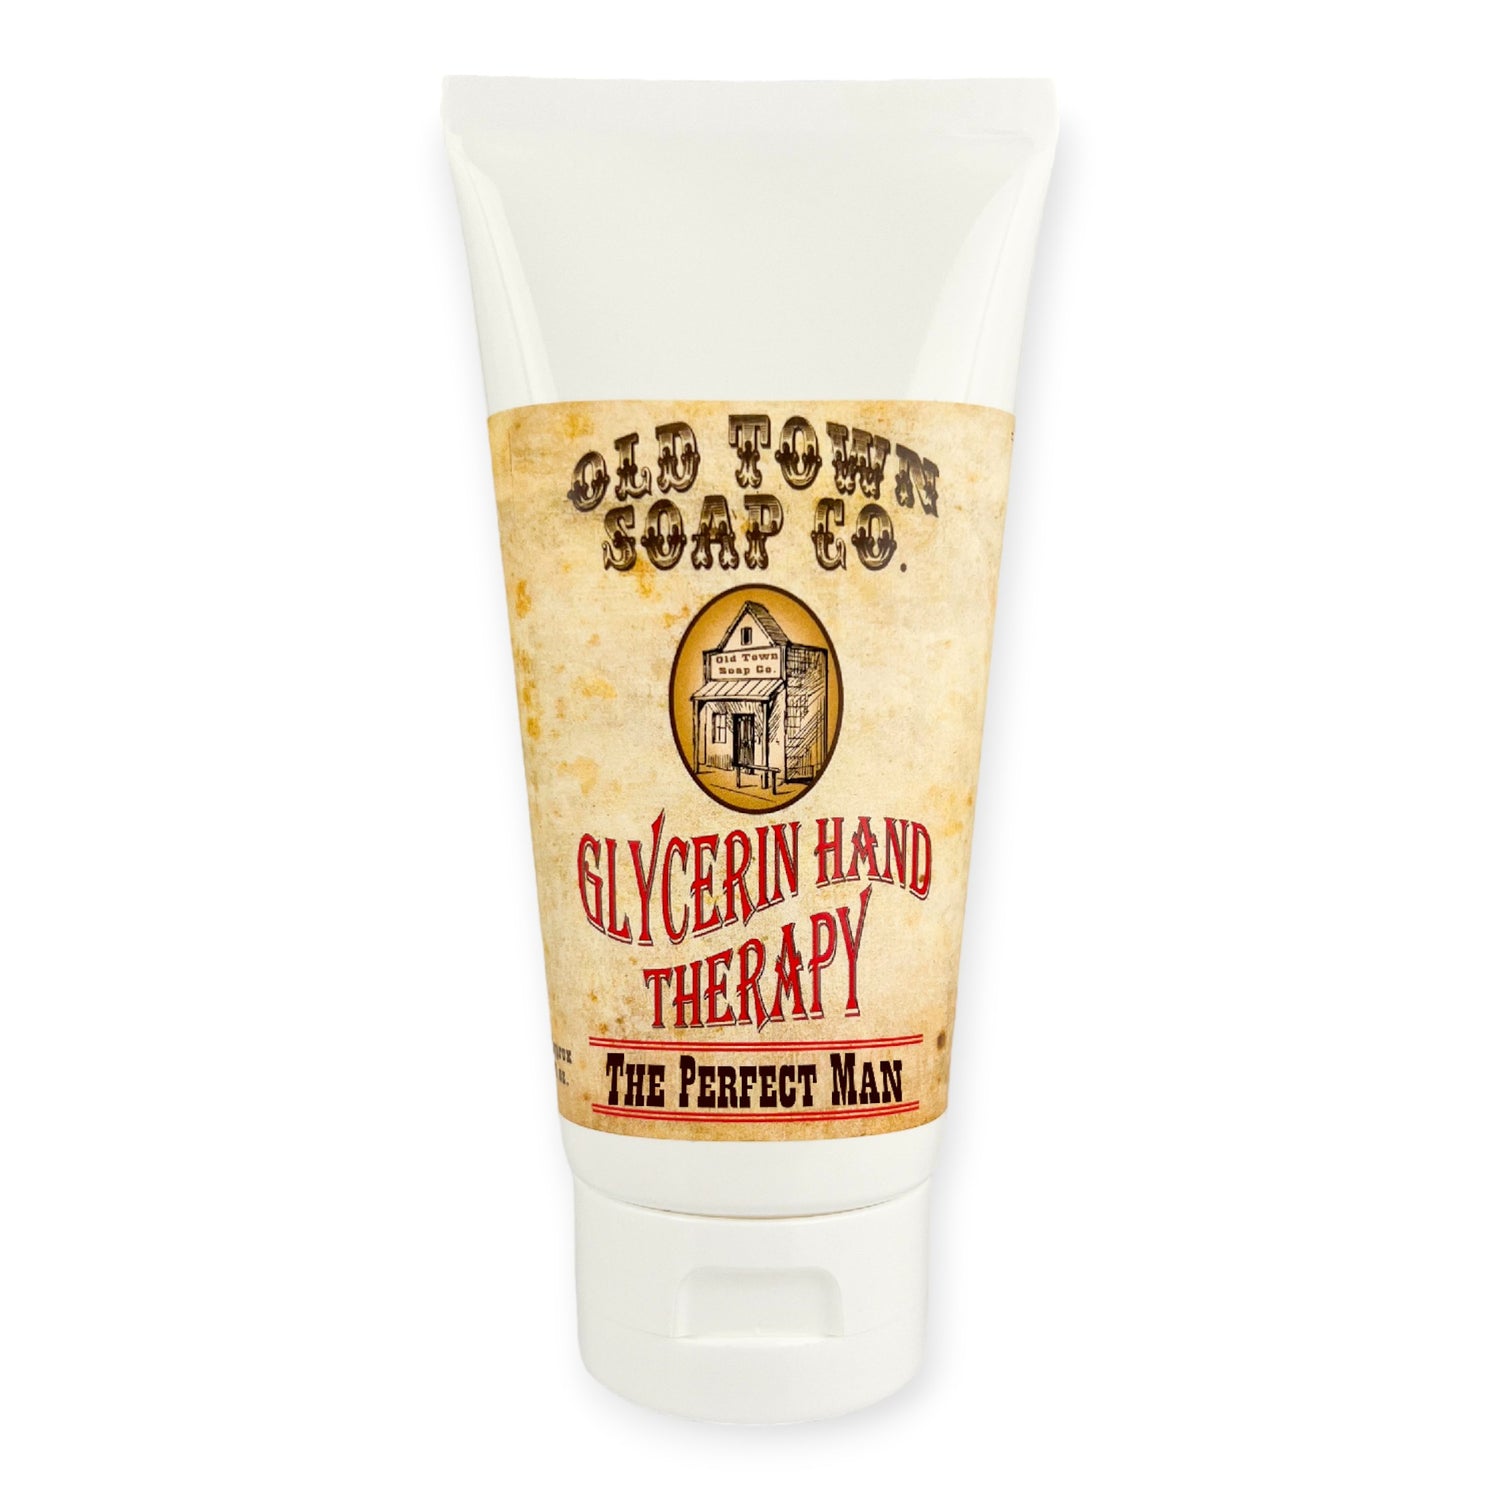 The Perfect Man 6oz Glycerin Hand Therapy